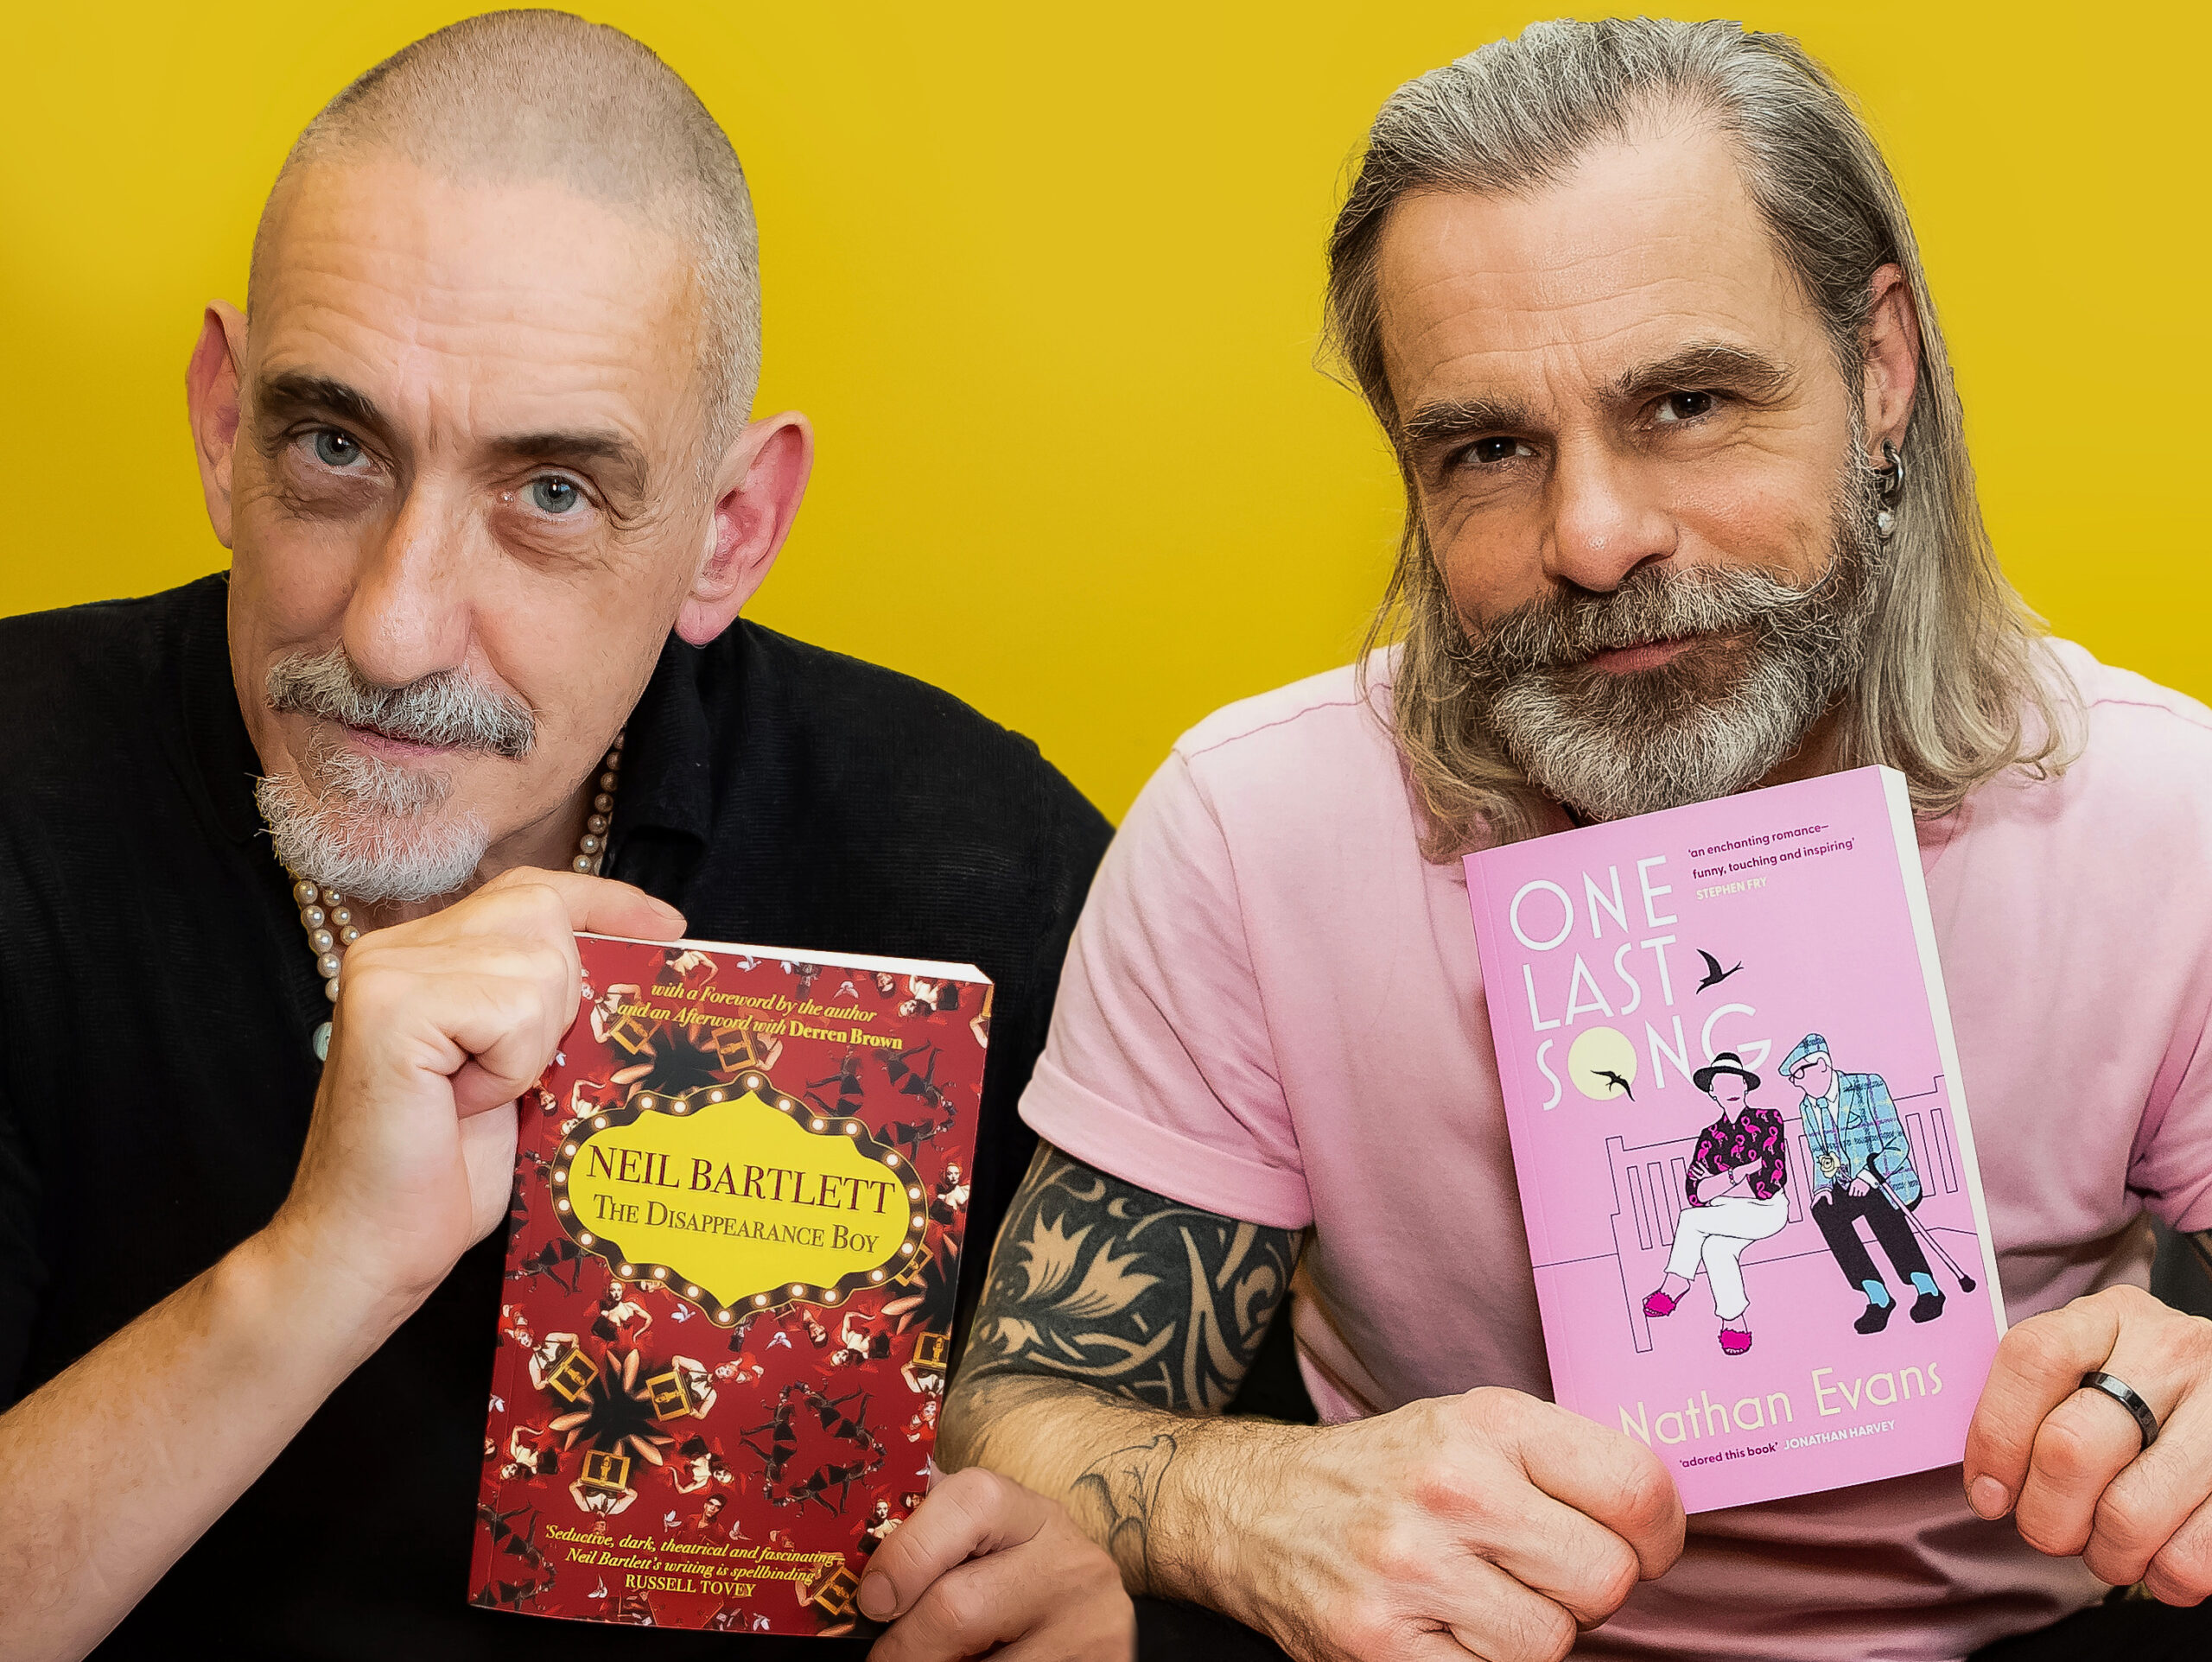 Authors Neil Bartlett and Nathan Evans to discuss publishing, writing novels, and queer past, present and future at Brighton’s Jubilee Library this weekend